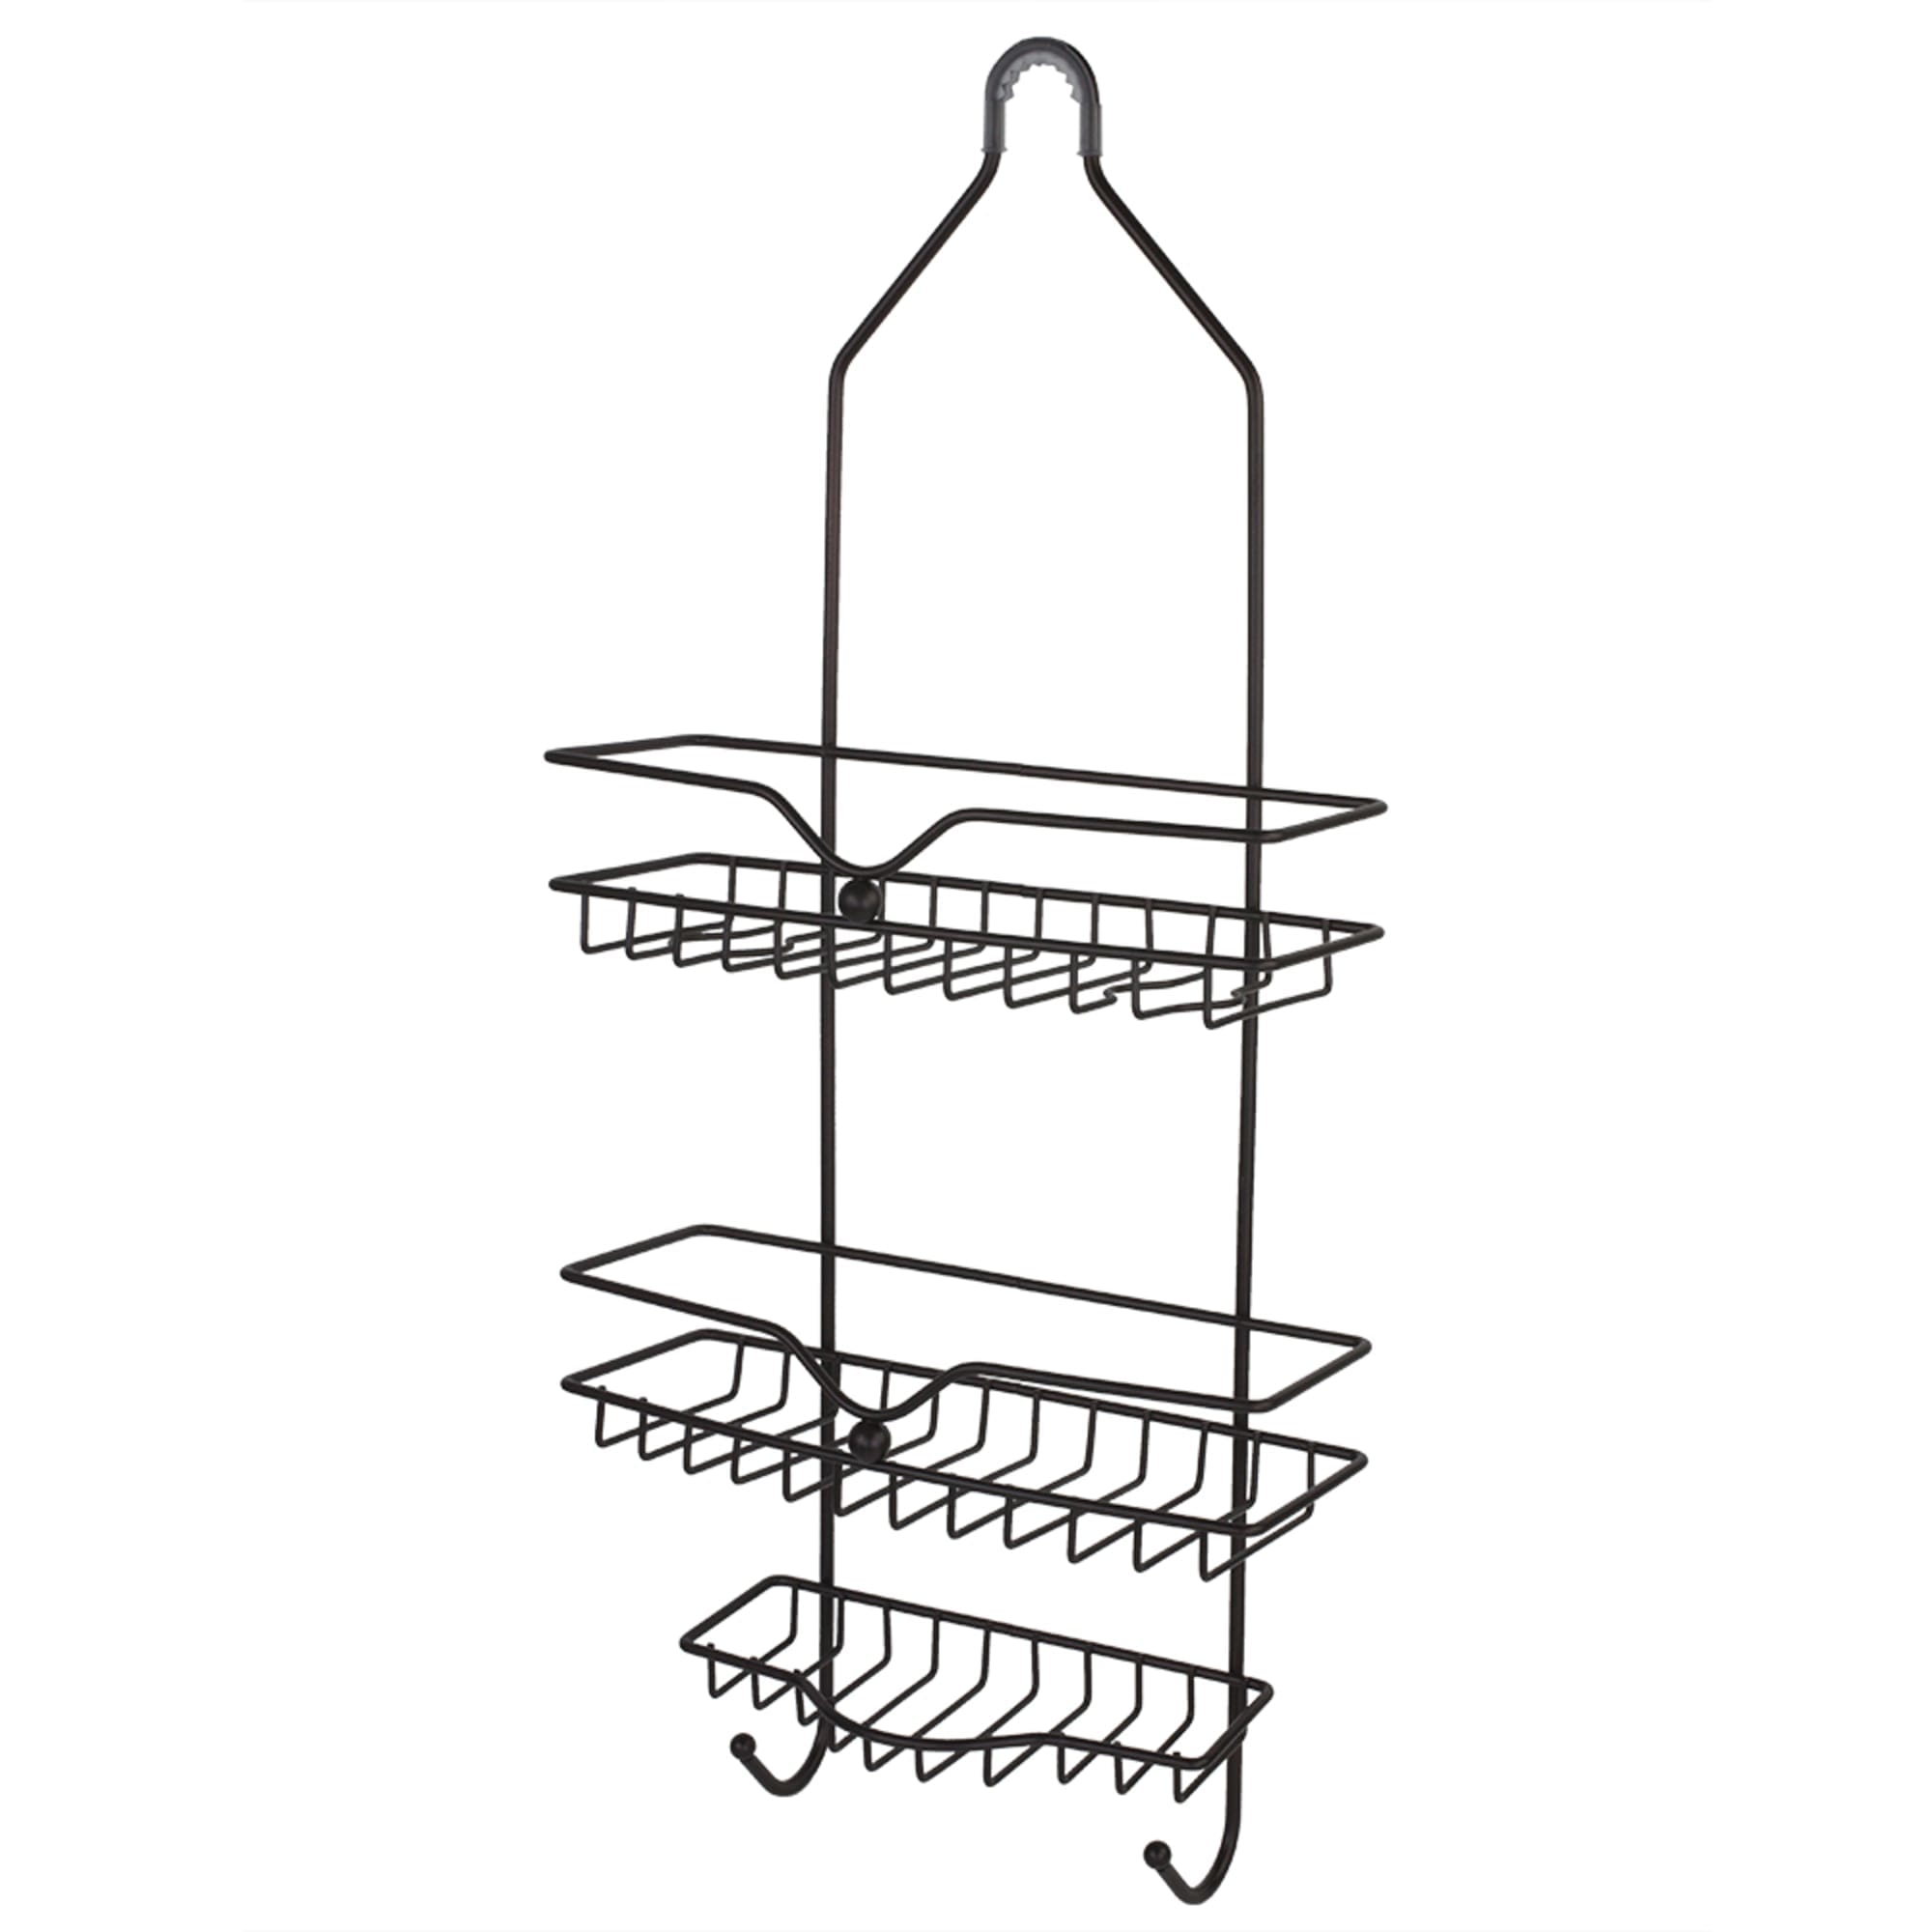 Home Basics Classic 2 Shelf Shower Caddy with Bottom Hooks and Center Soap Dish Tray, Bronze $10.00 EACH, CASE PACK OF 12